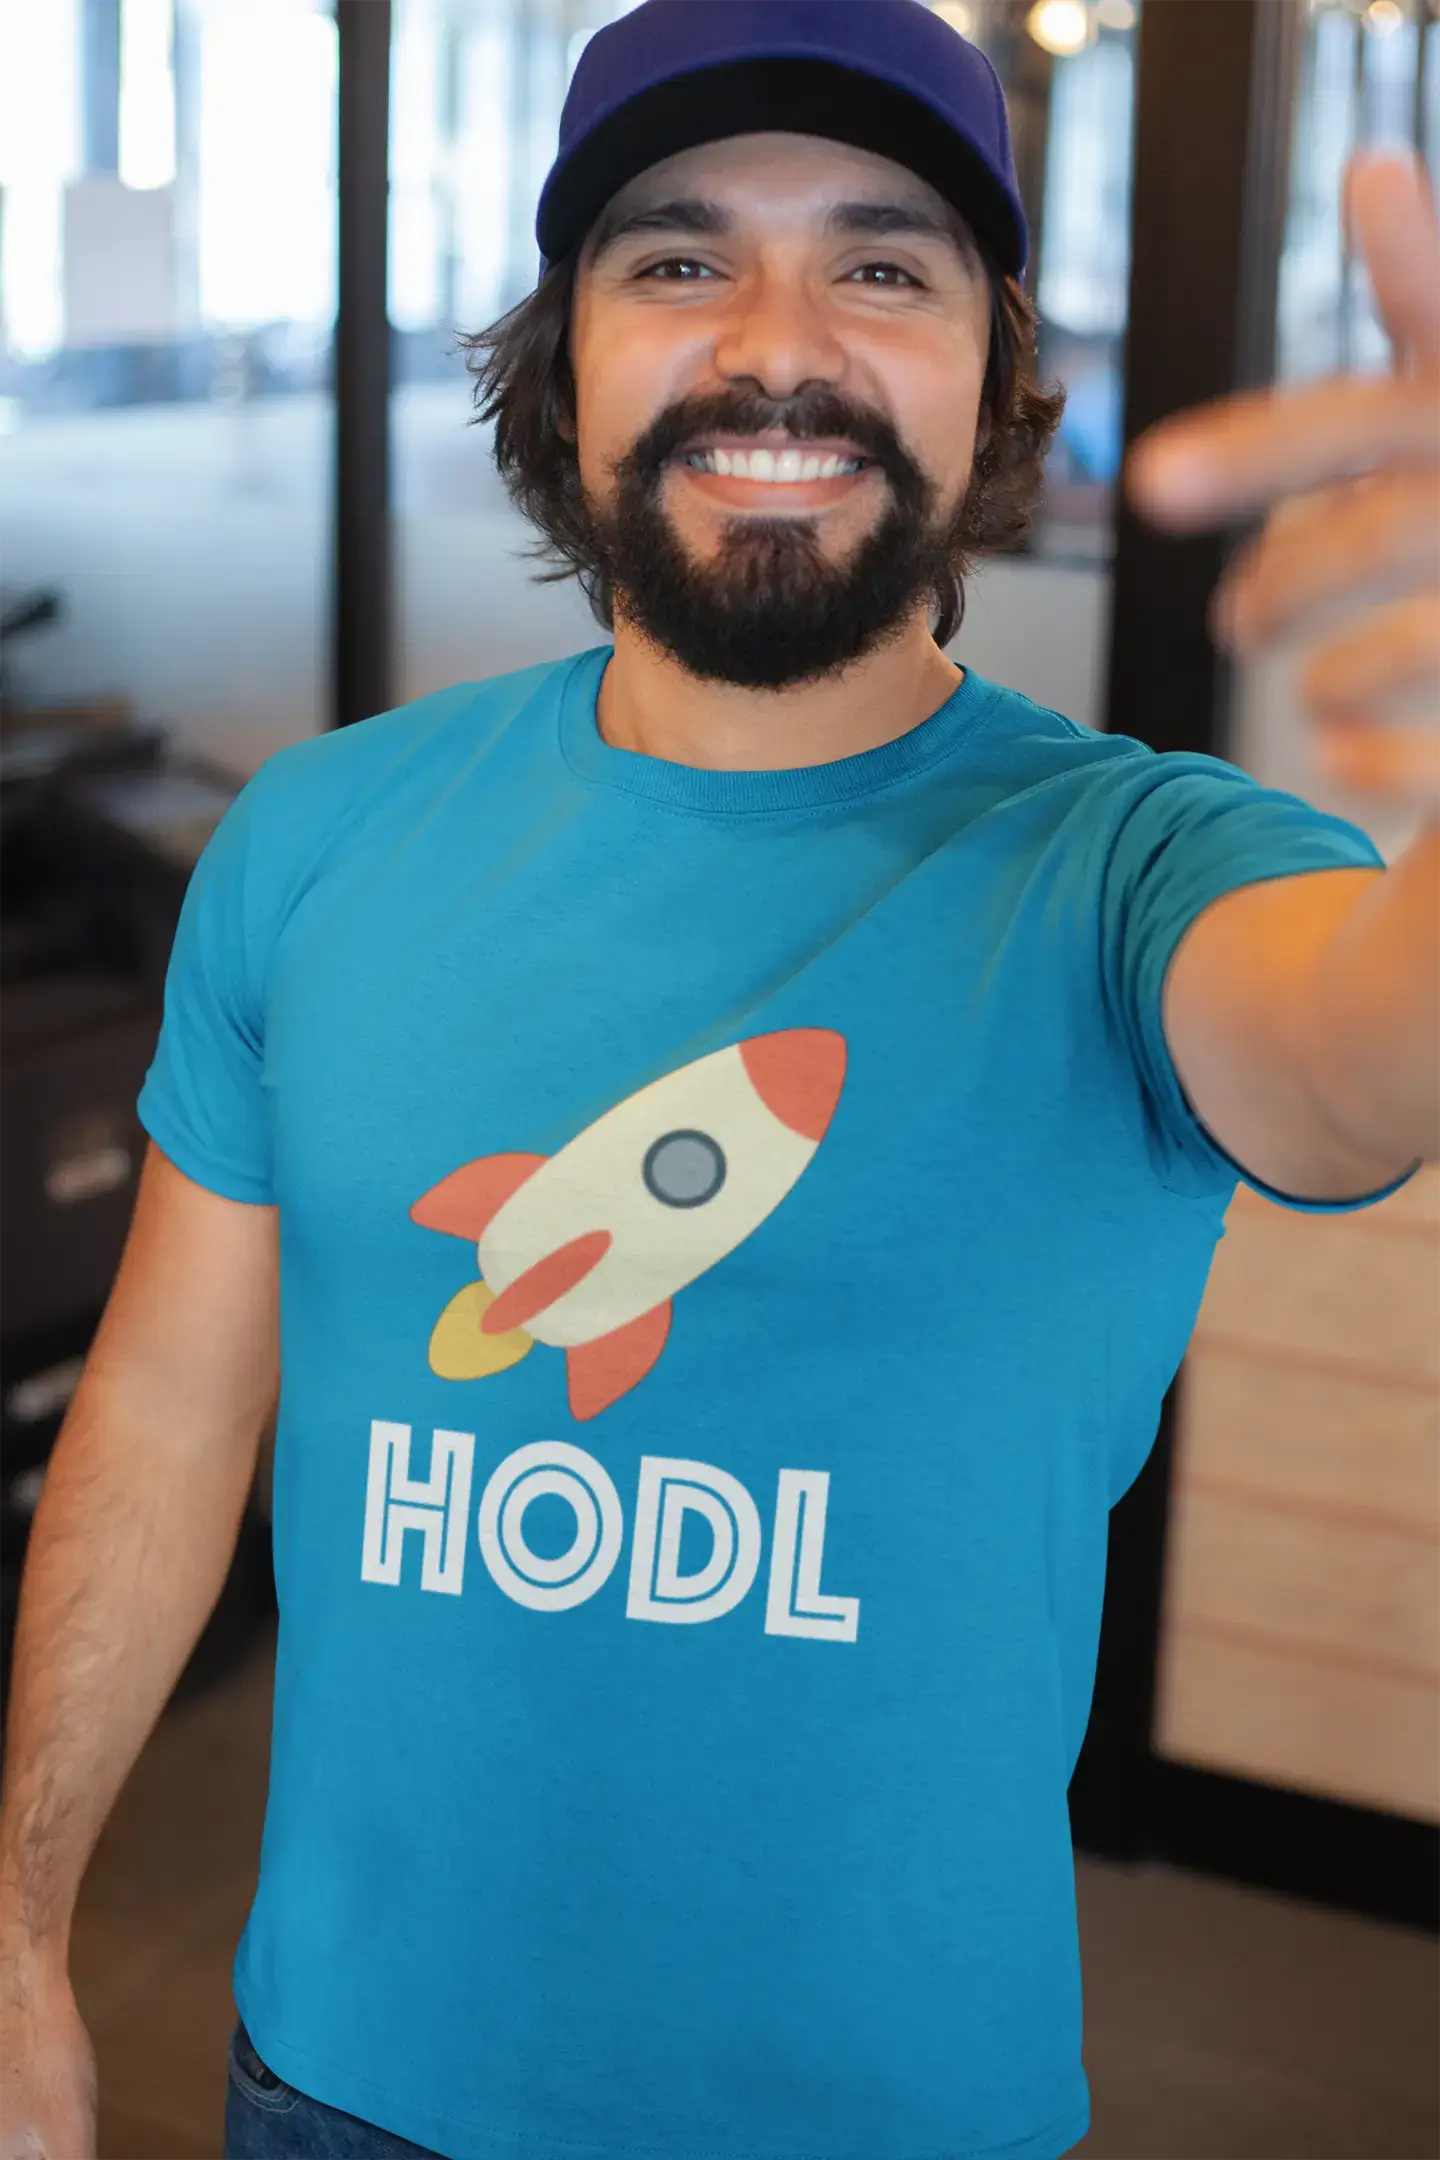 Men's Graphic T-Shirt Hodl To The Moon T-Shirt Crypto Tee Funny Traders Gift Idea